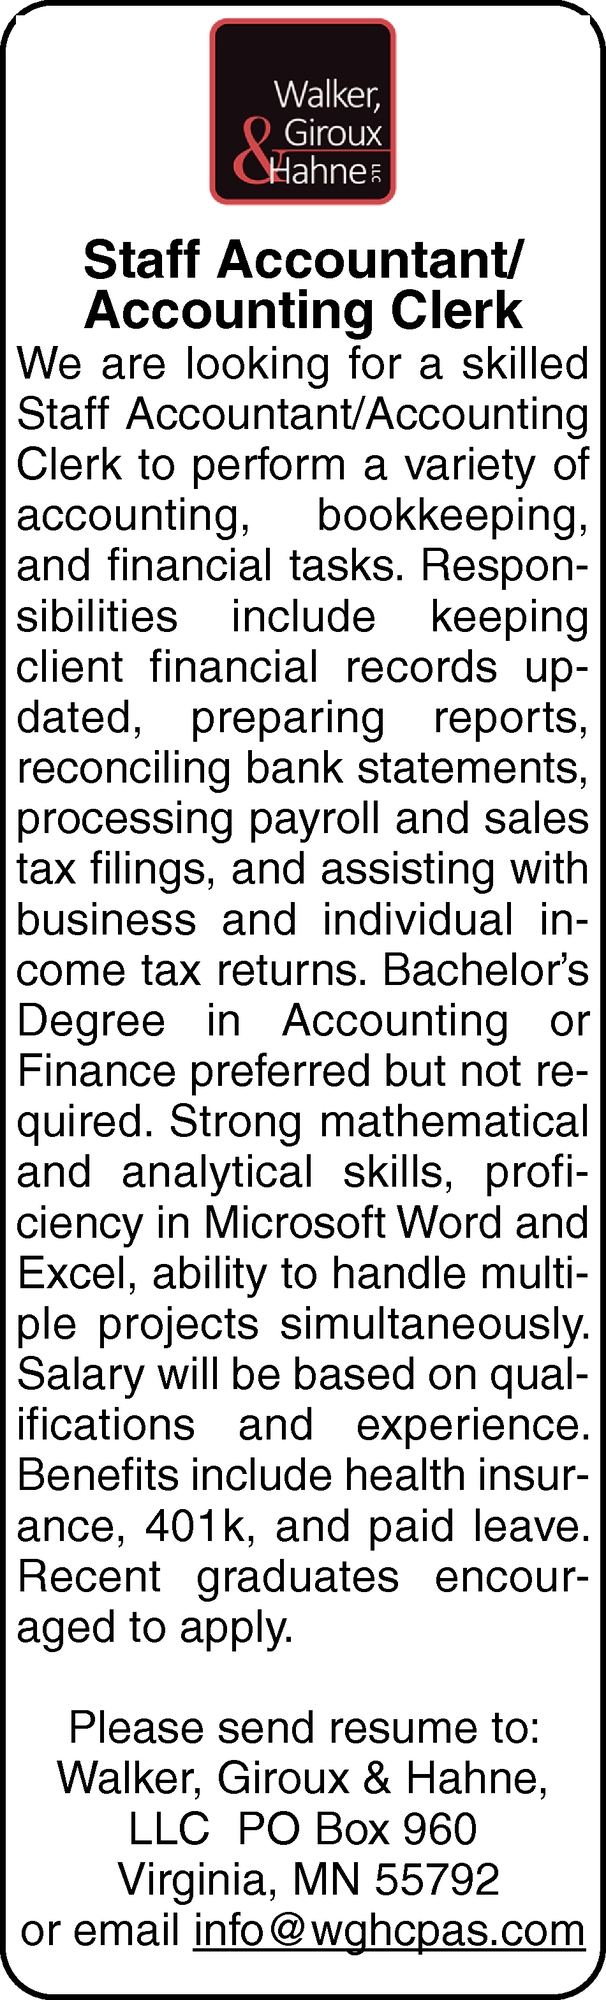 Staff Accountant/ Accounting Clerk